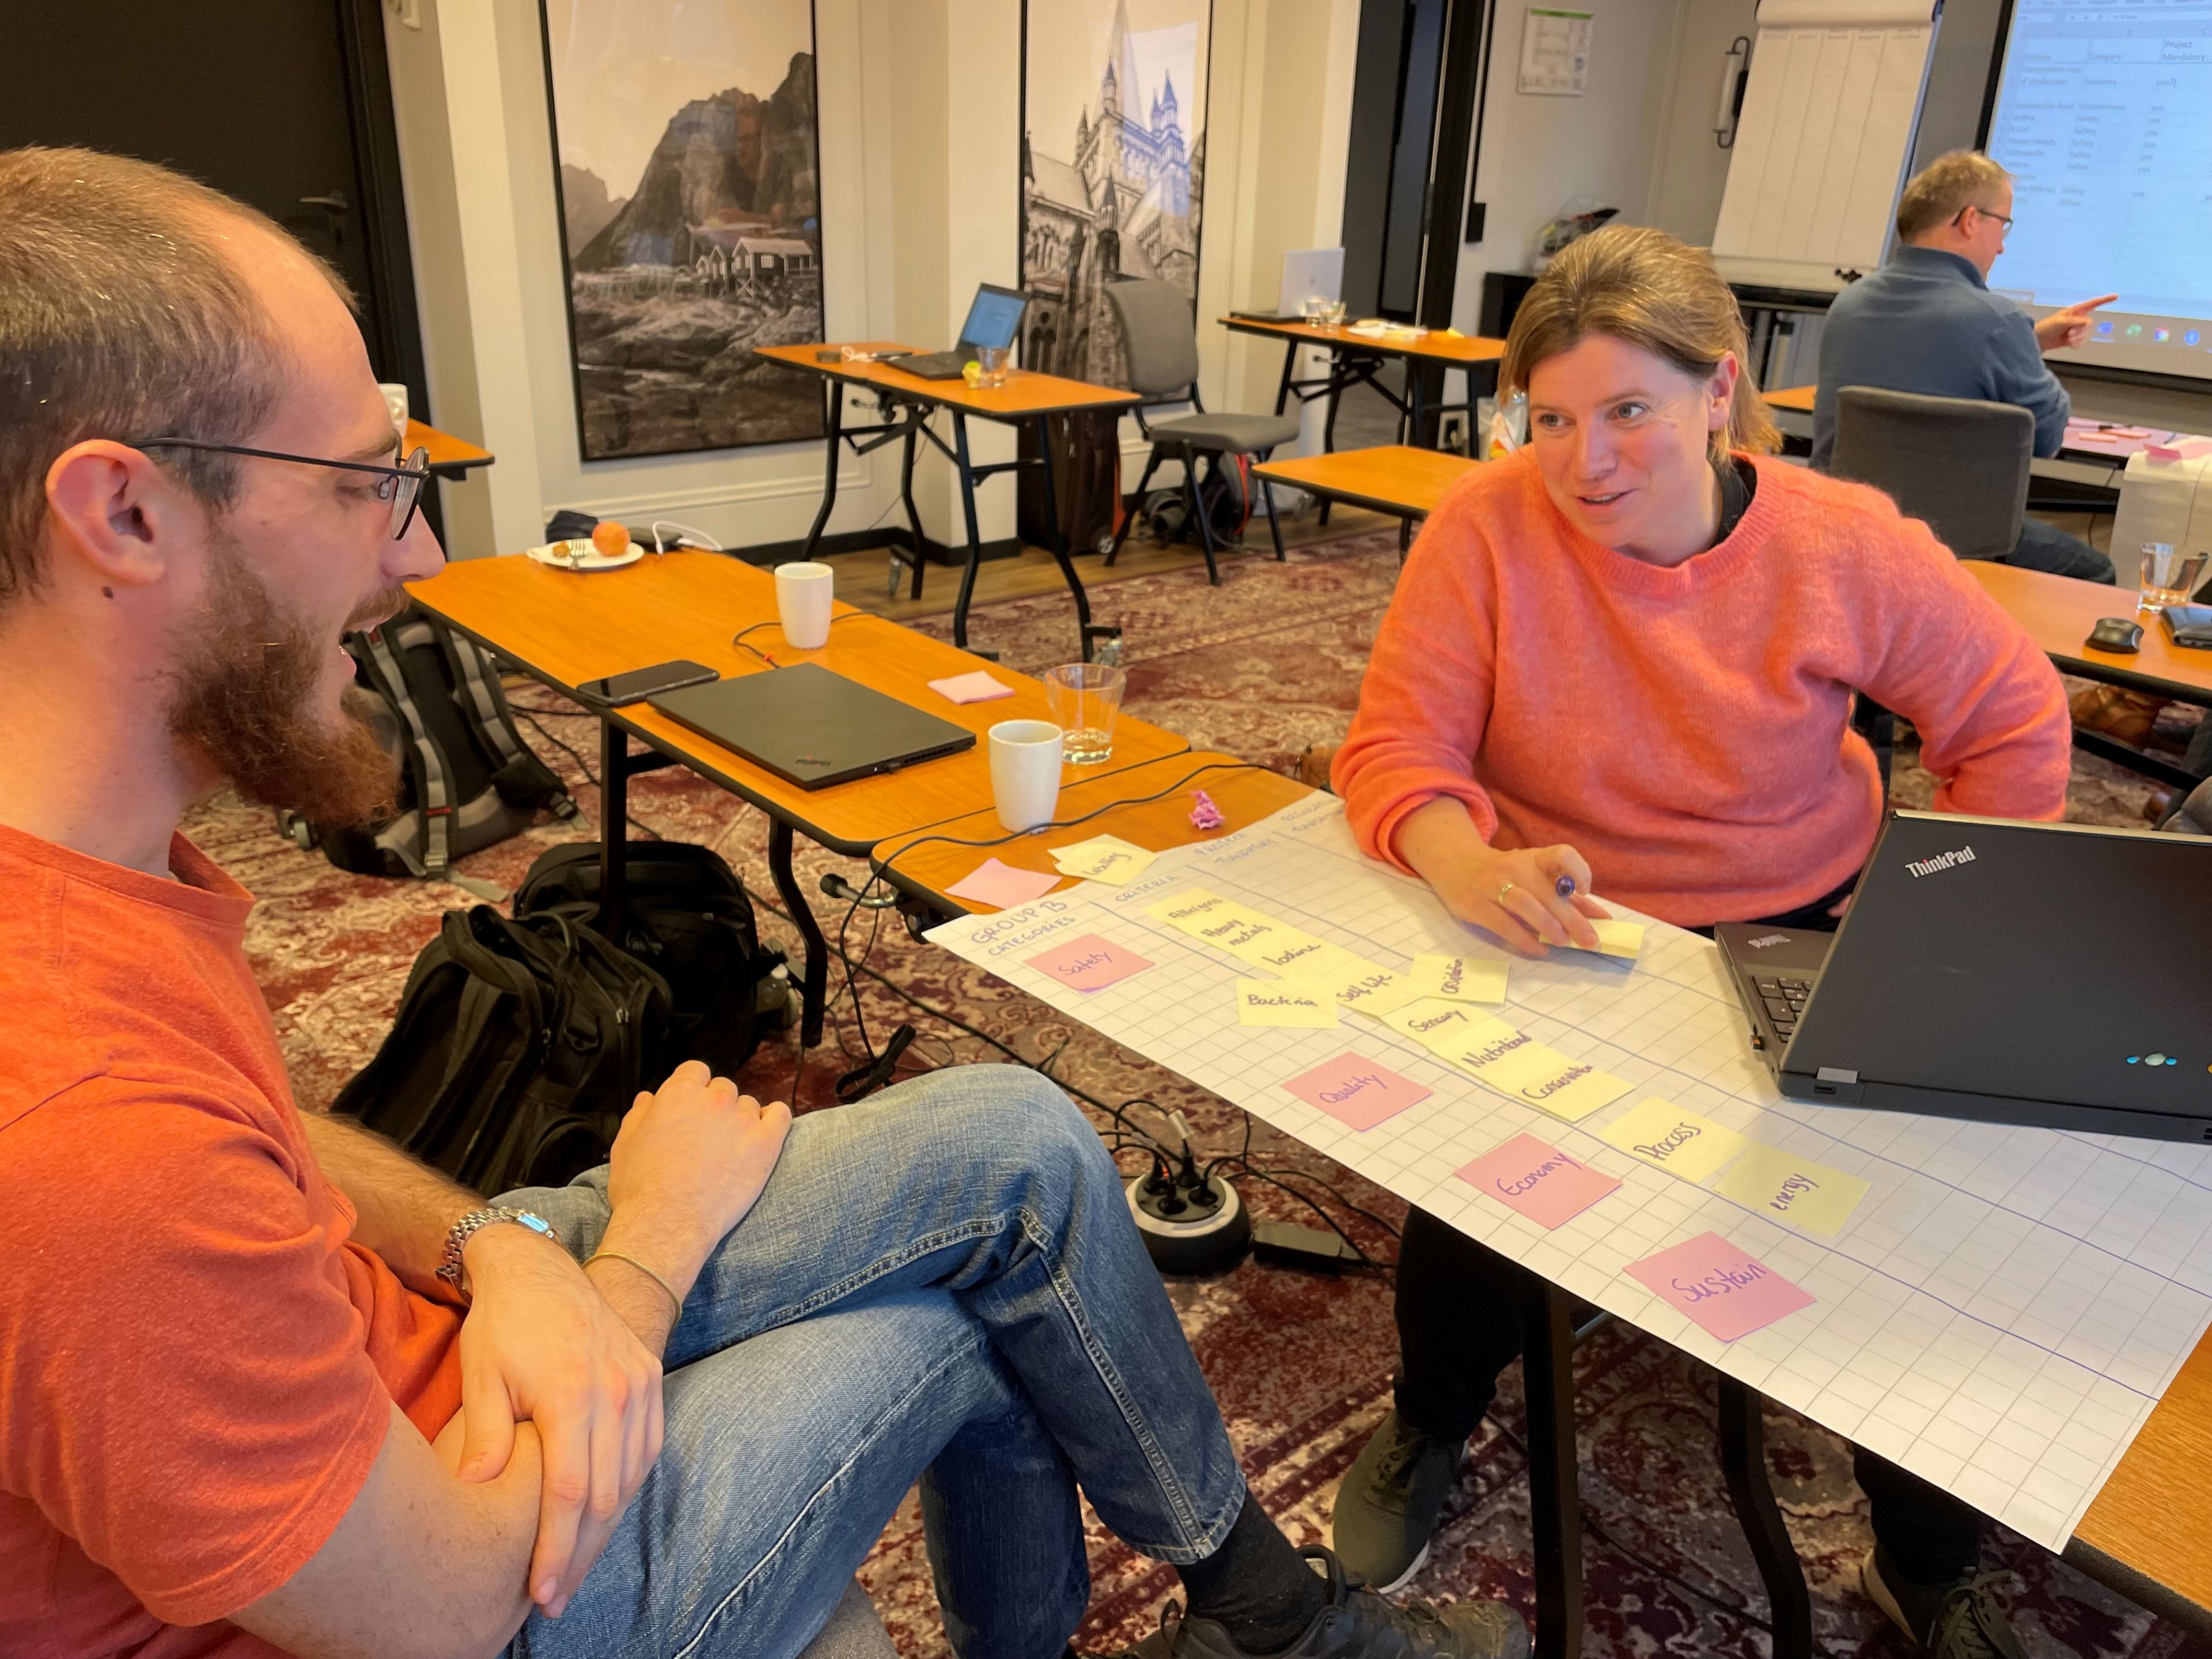 Fresh inputs from Trondheim to plan activities for 2023 